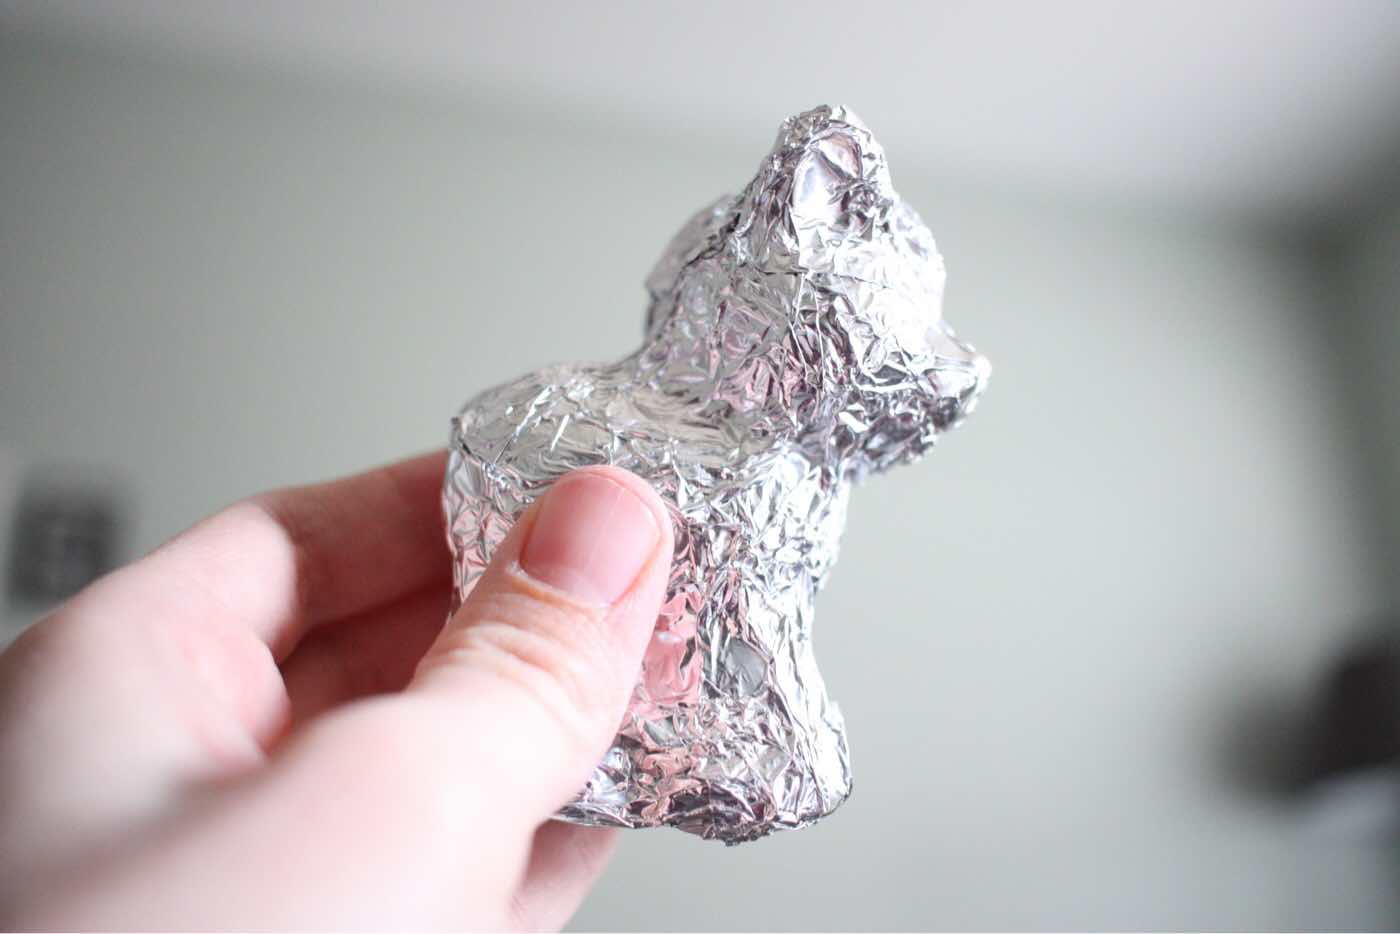 Foil wrapped toys - a simple activity to give old toys new life